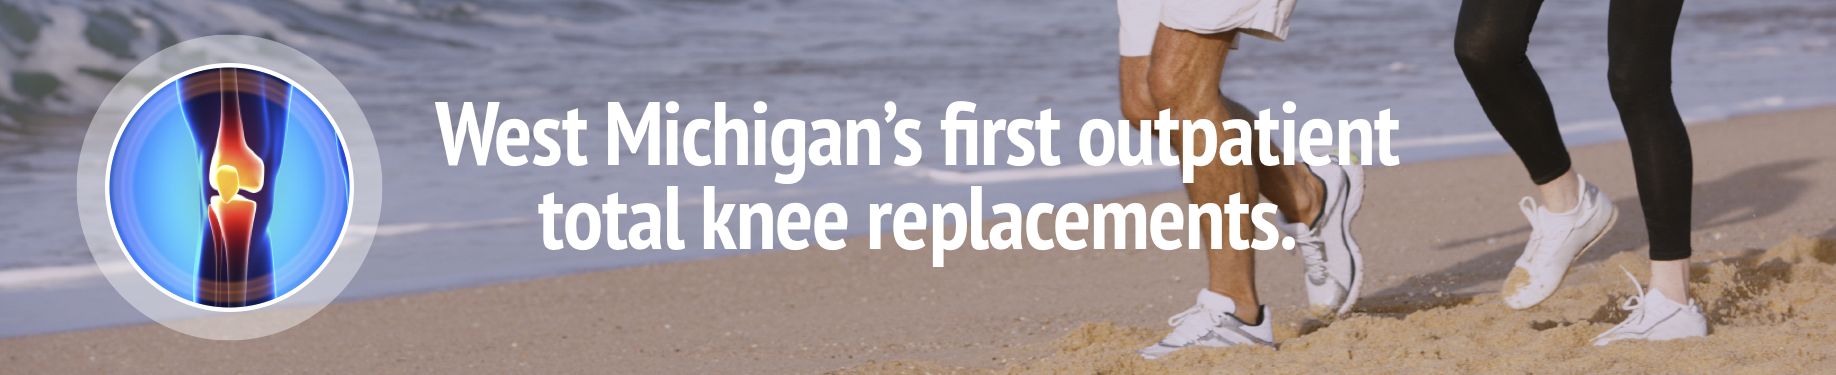 For all of your knee care needs in the Muskegon & Grand Haven, MI areas be sure to contact the experts at Orthopaedic Associates of Muskegon!